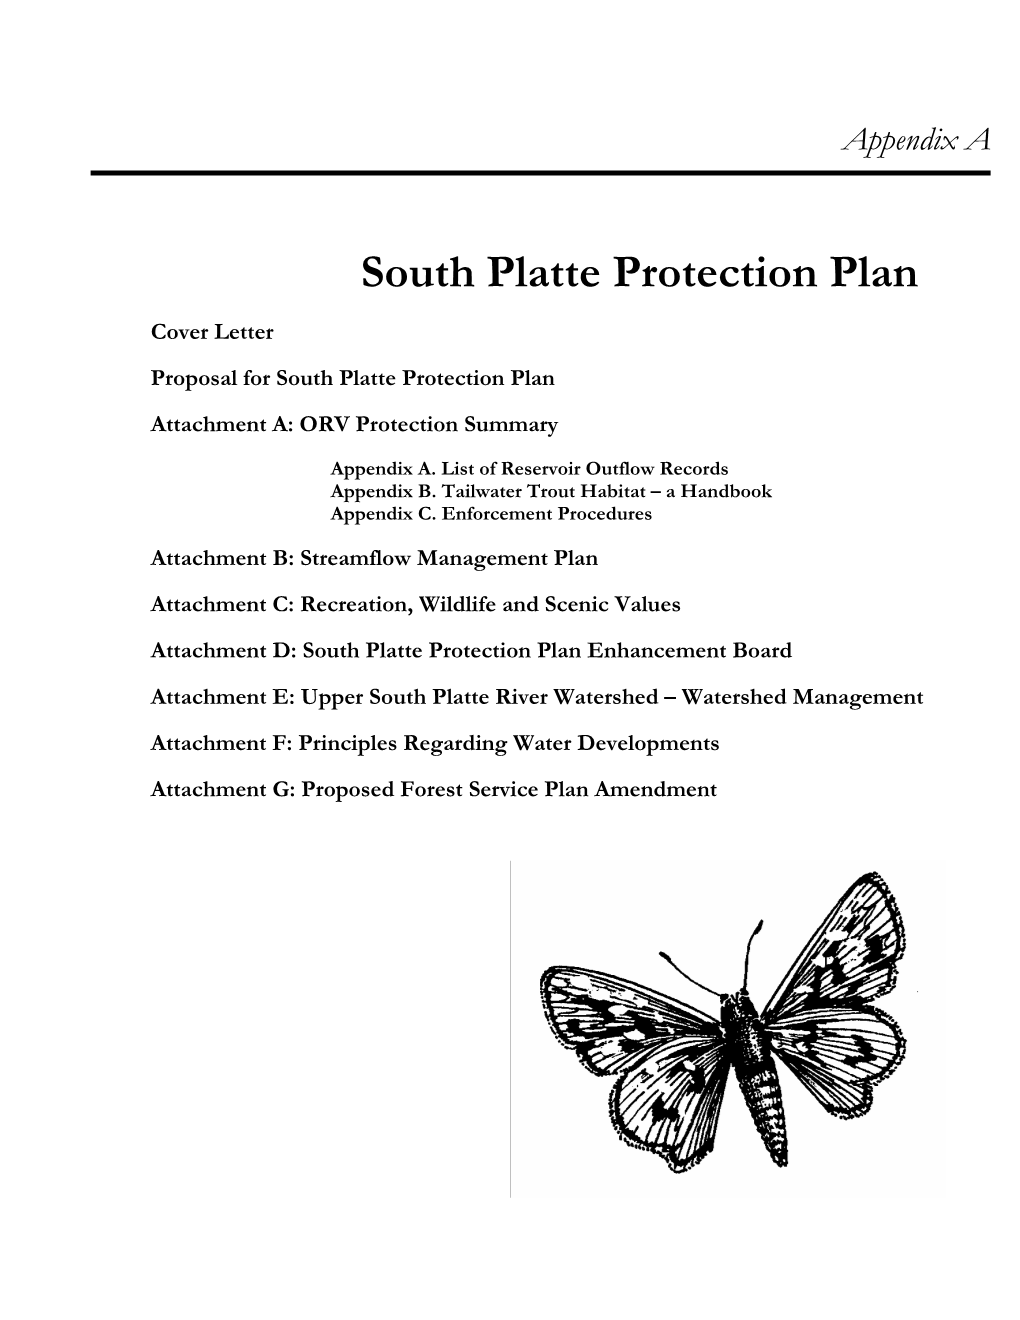 South Platte Protection Plan Cover Letter Proposal for South Platte Protection Plan Attachment A: ORV Protection Summary